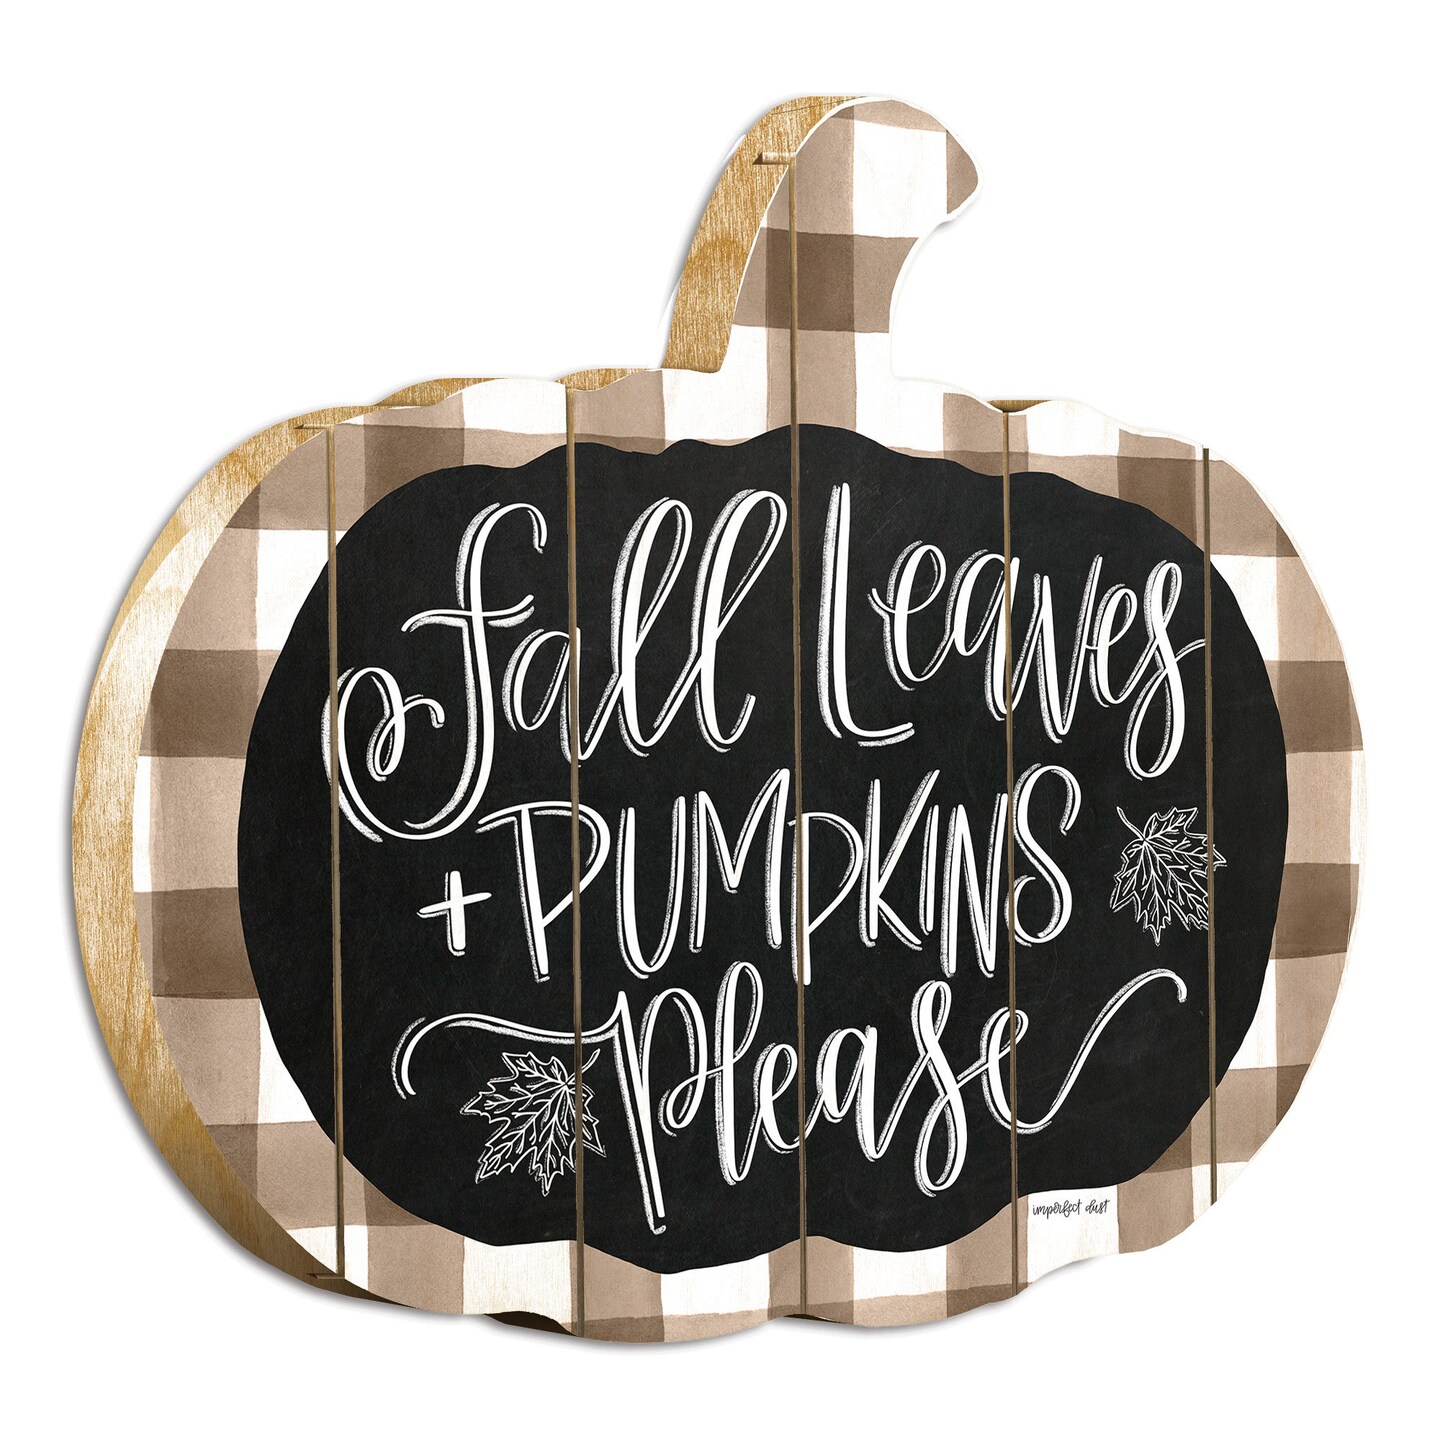 Fall Leaves and Pumpkins Please - By Artisan Imperfect Dust Printed on Wooden Pumpkin Wall Art